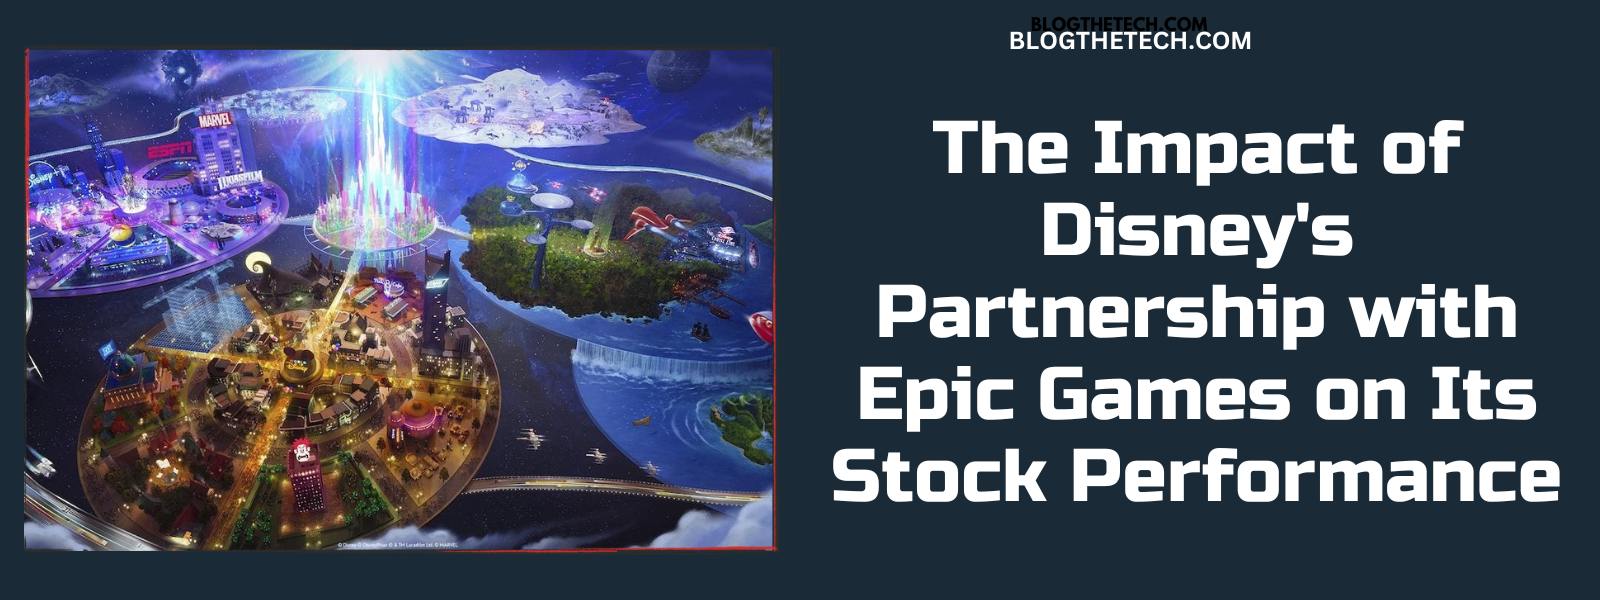 Disneys-Partnership-with-Epic-Games-on-Its-Stock-Performance-Featured